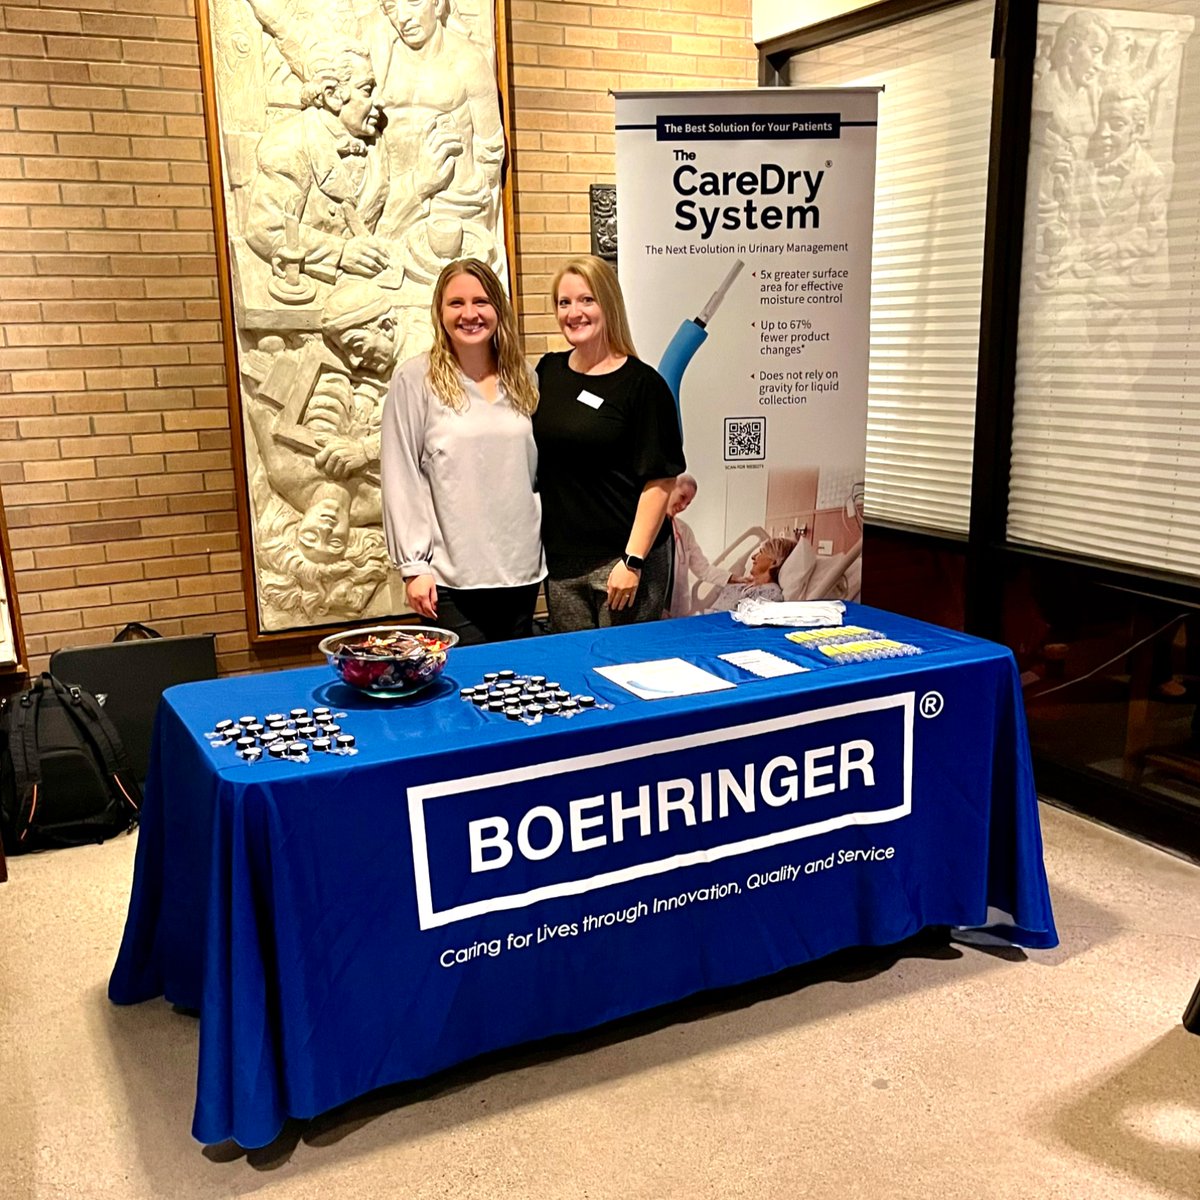 Kelly and Elena are at the CAMC Nursing Professional Development Conference today.  Stop by to learn more about The CareDry® System!

#externalcatheter #camc #nursing